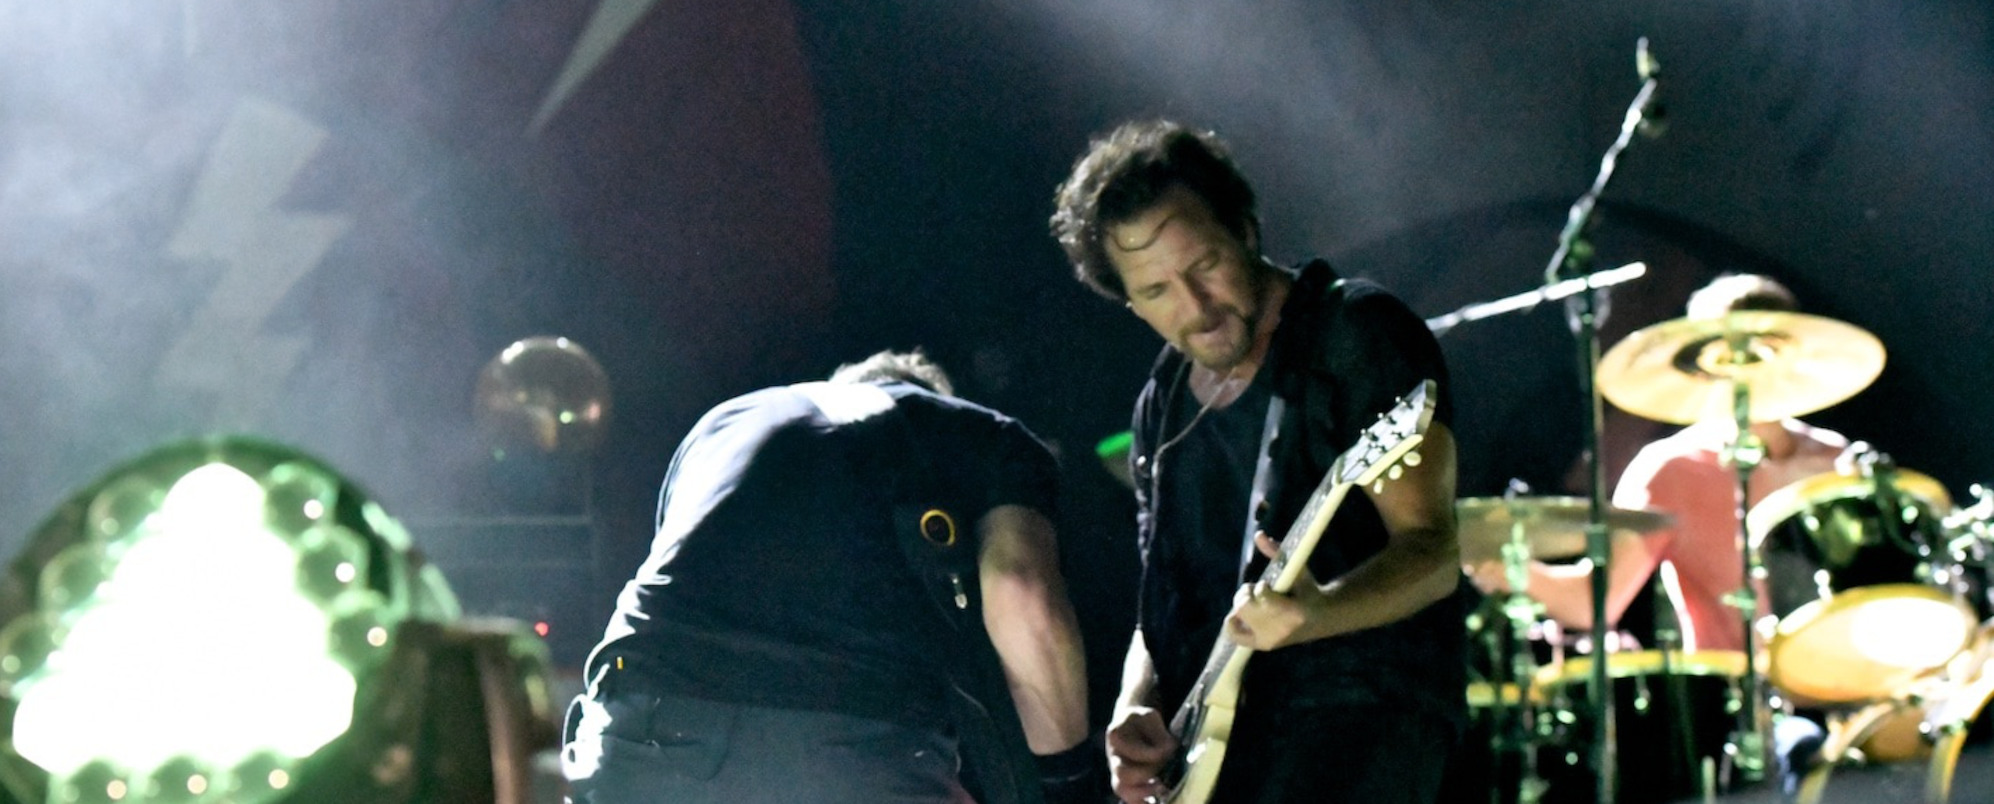 Pearl Jam Plays First Show in Over a Year, Debuts Several New Songs